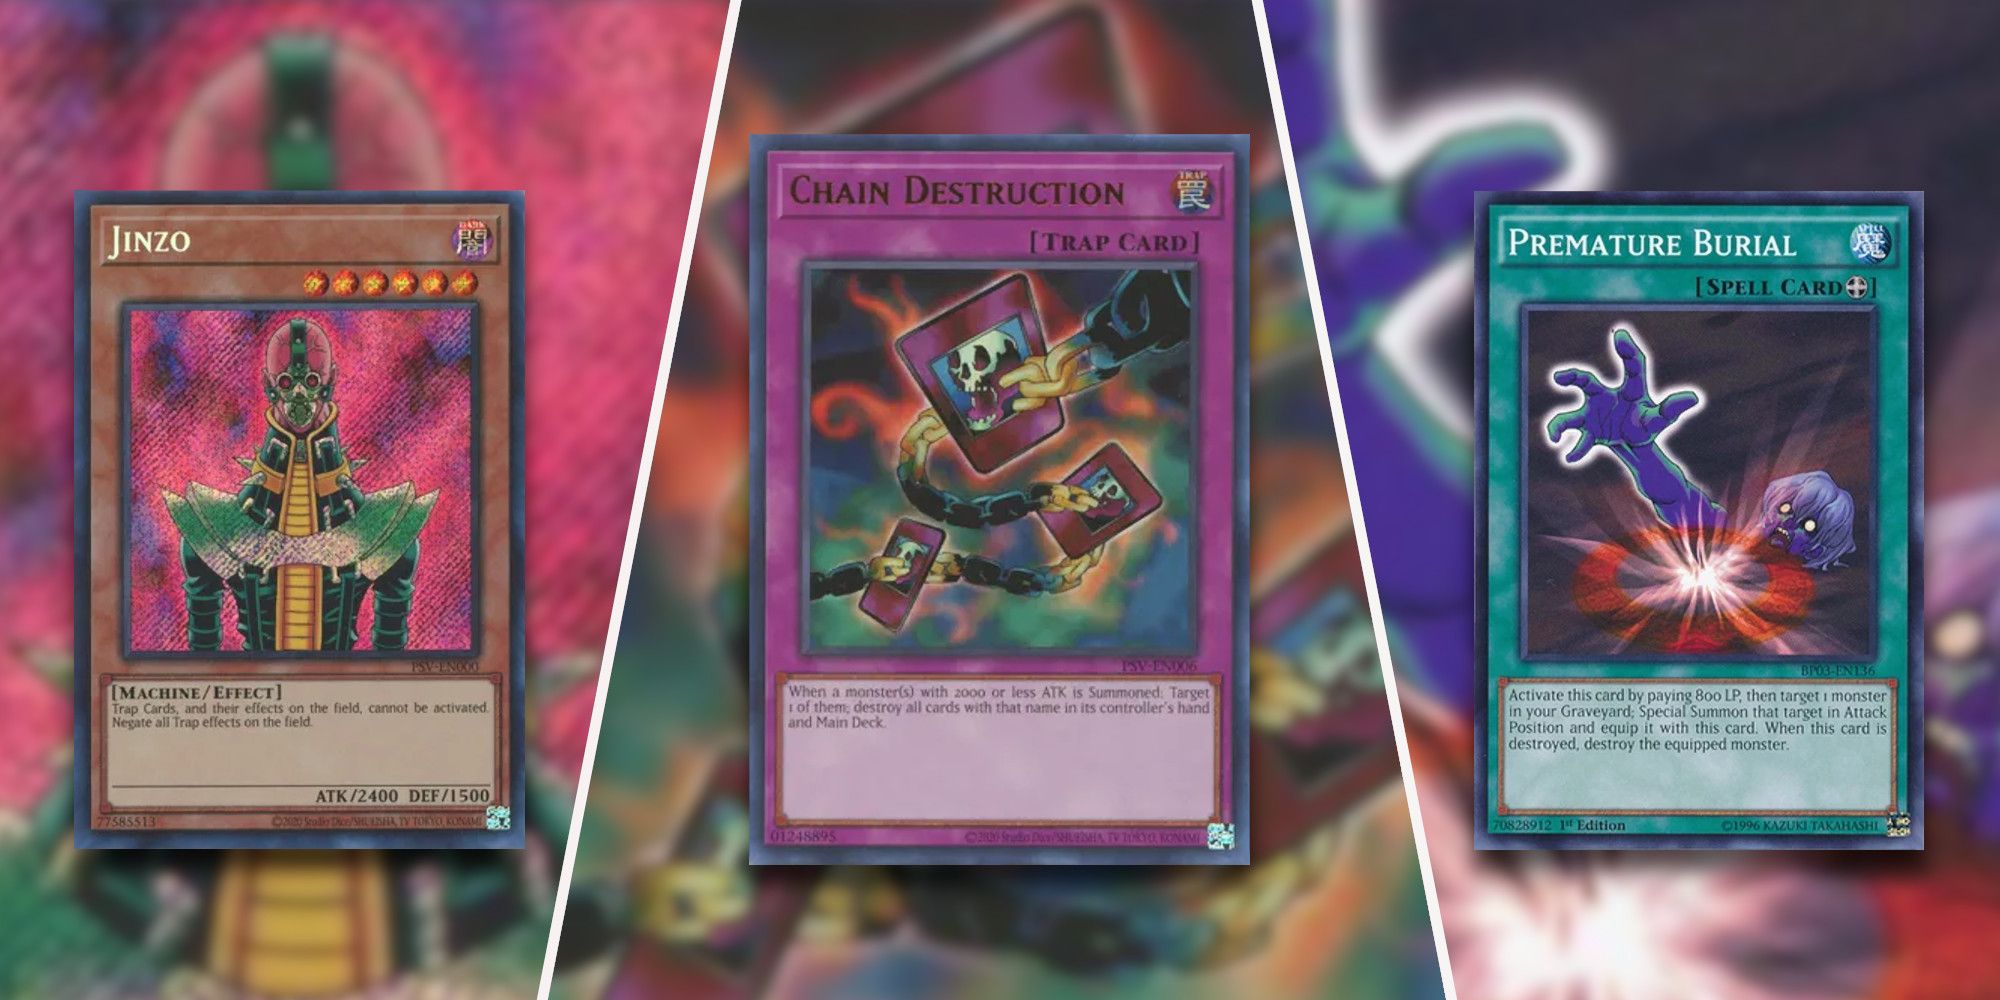 Jinzo, Chain Destruction and Premature Burial from Yu-Gi-Oh